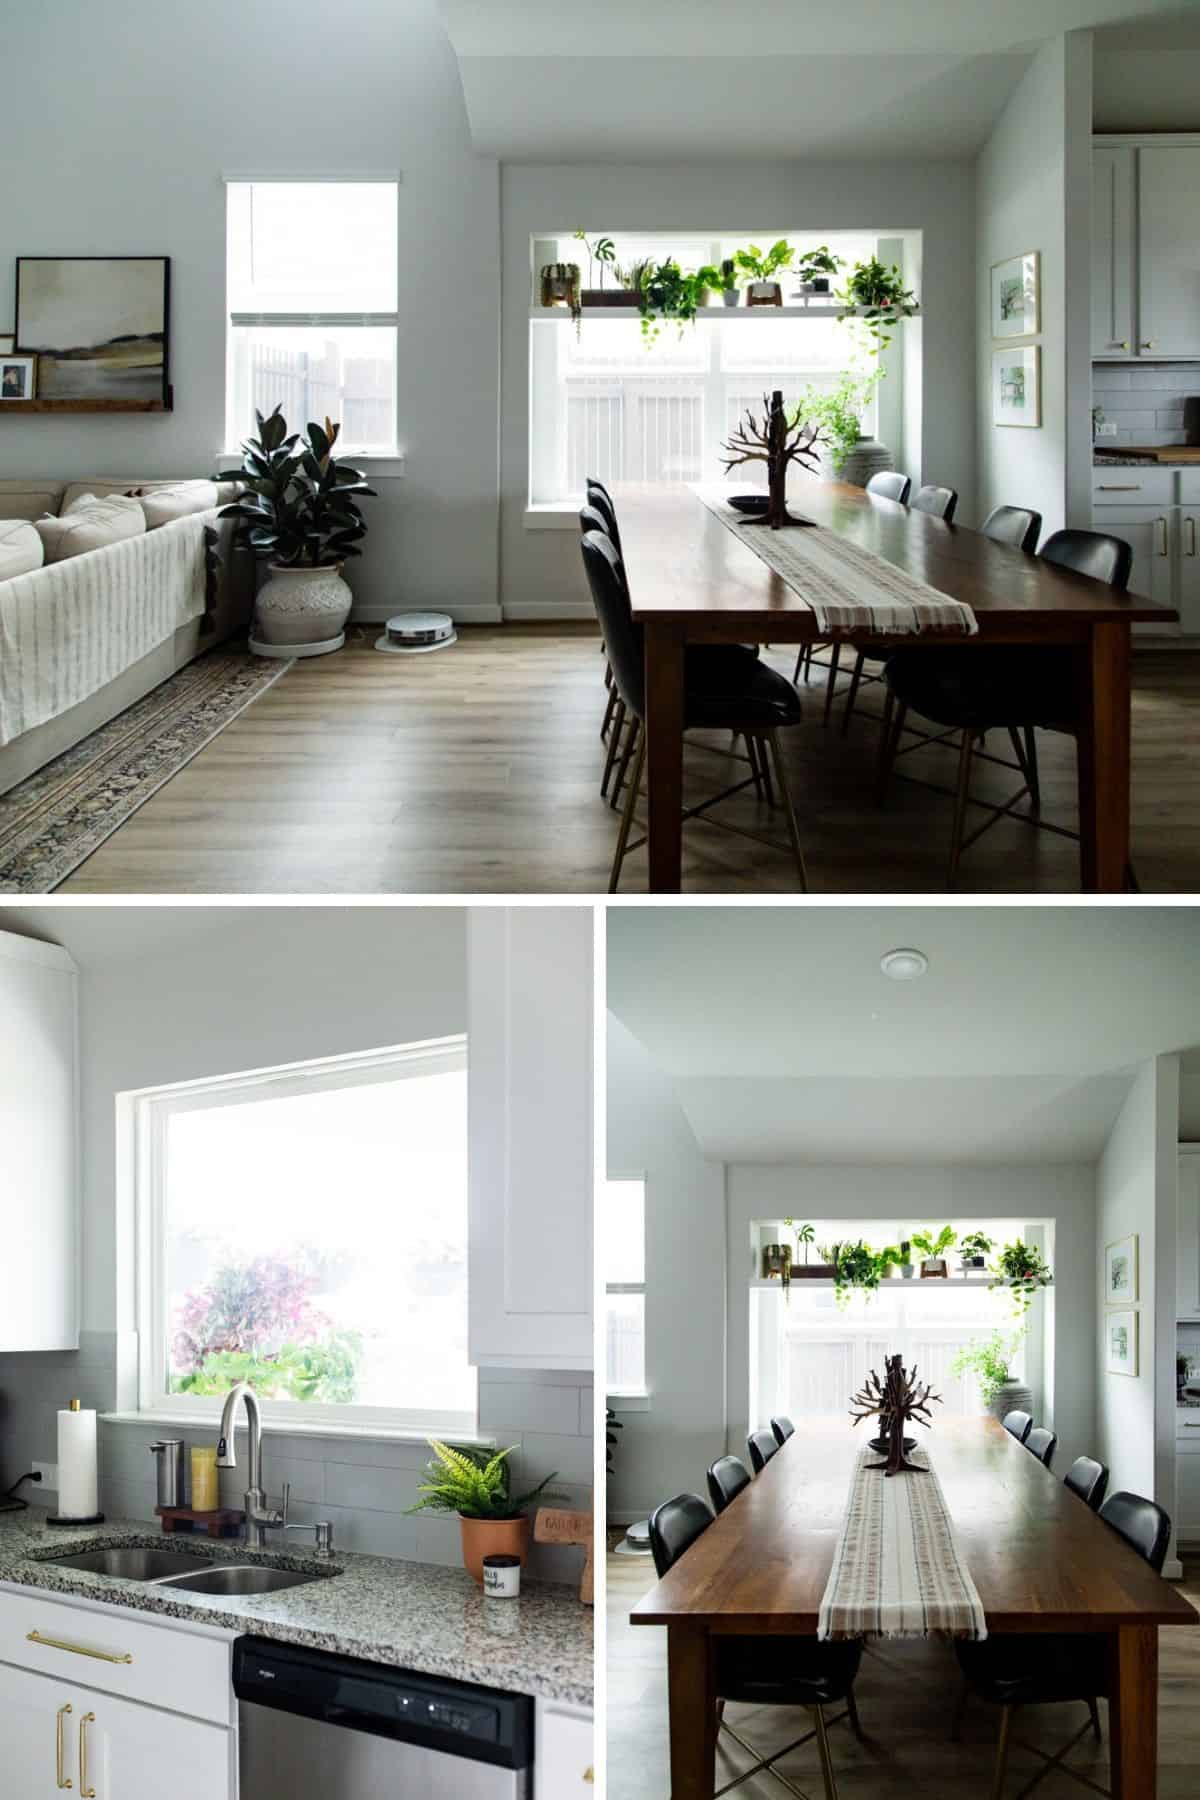 Collage of three images of a kitchen and dining room